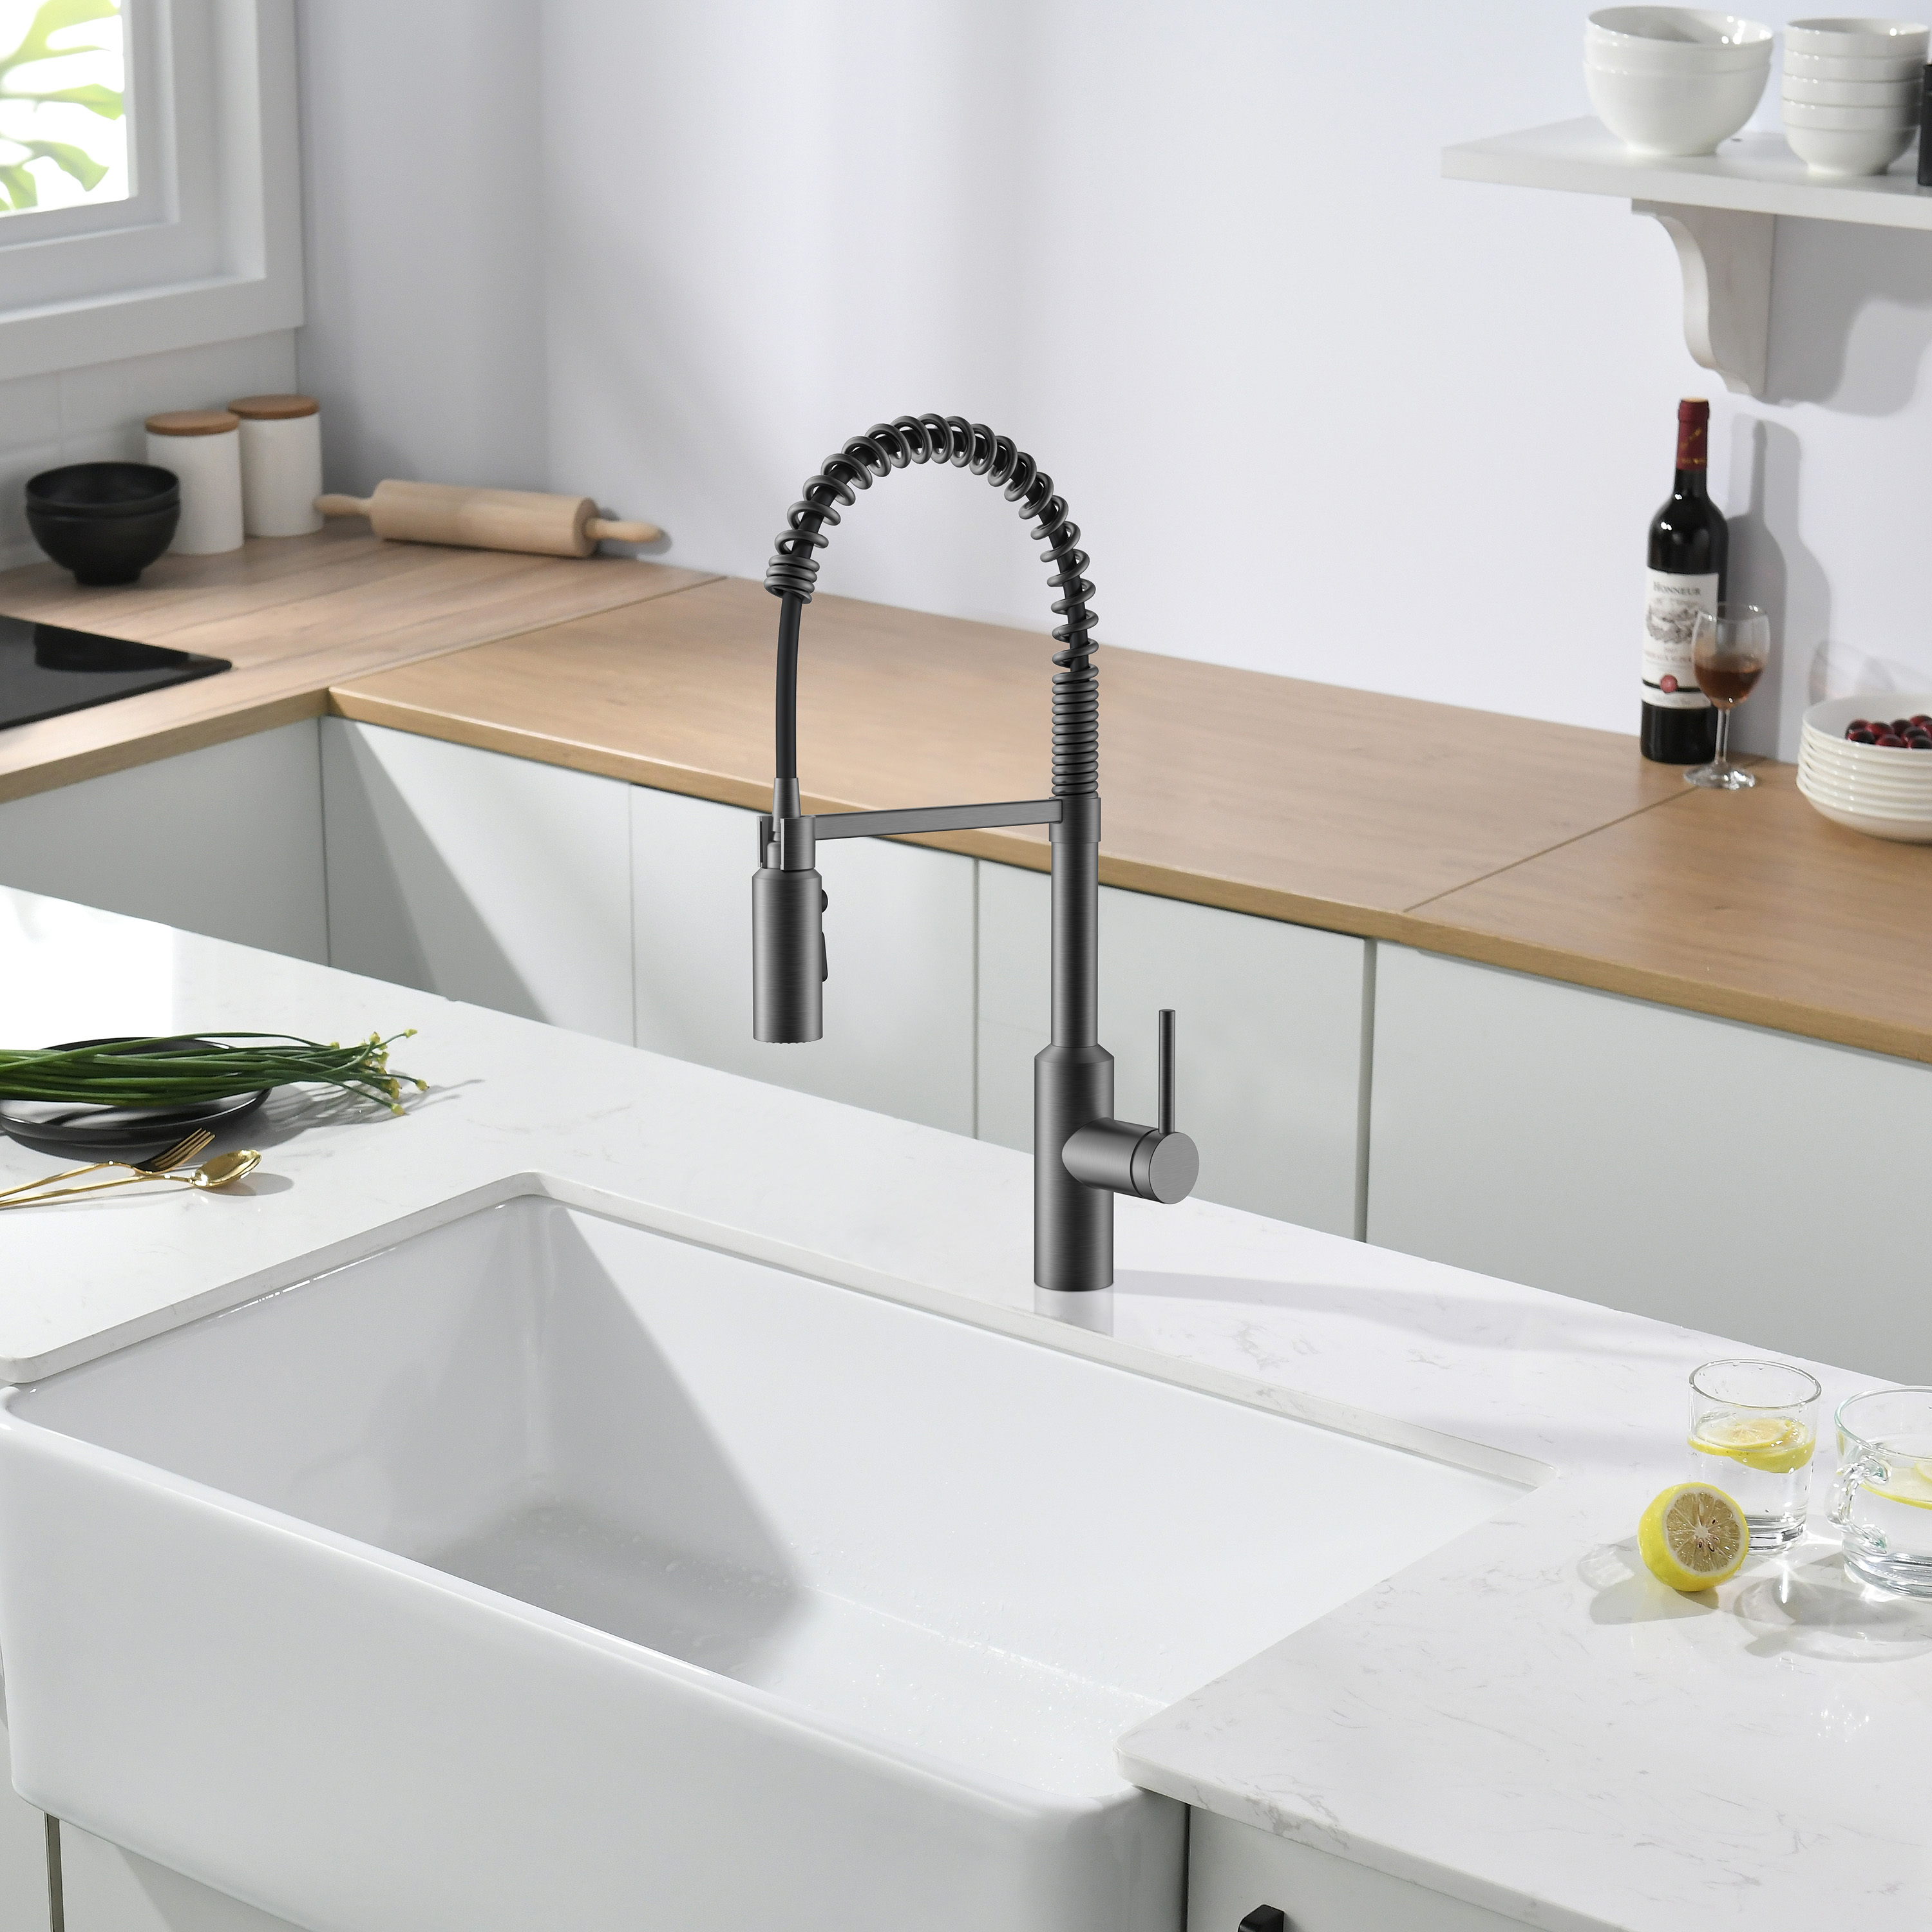 Touchless Kitchen Faucets Brushed Nickel Pull Down Kitchen Faucet